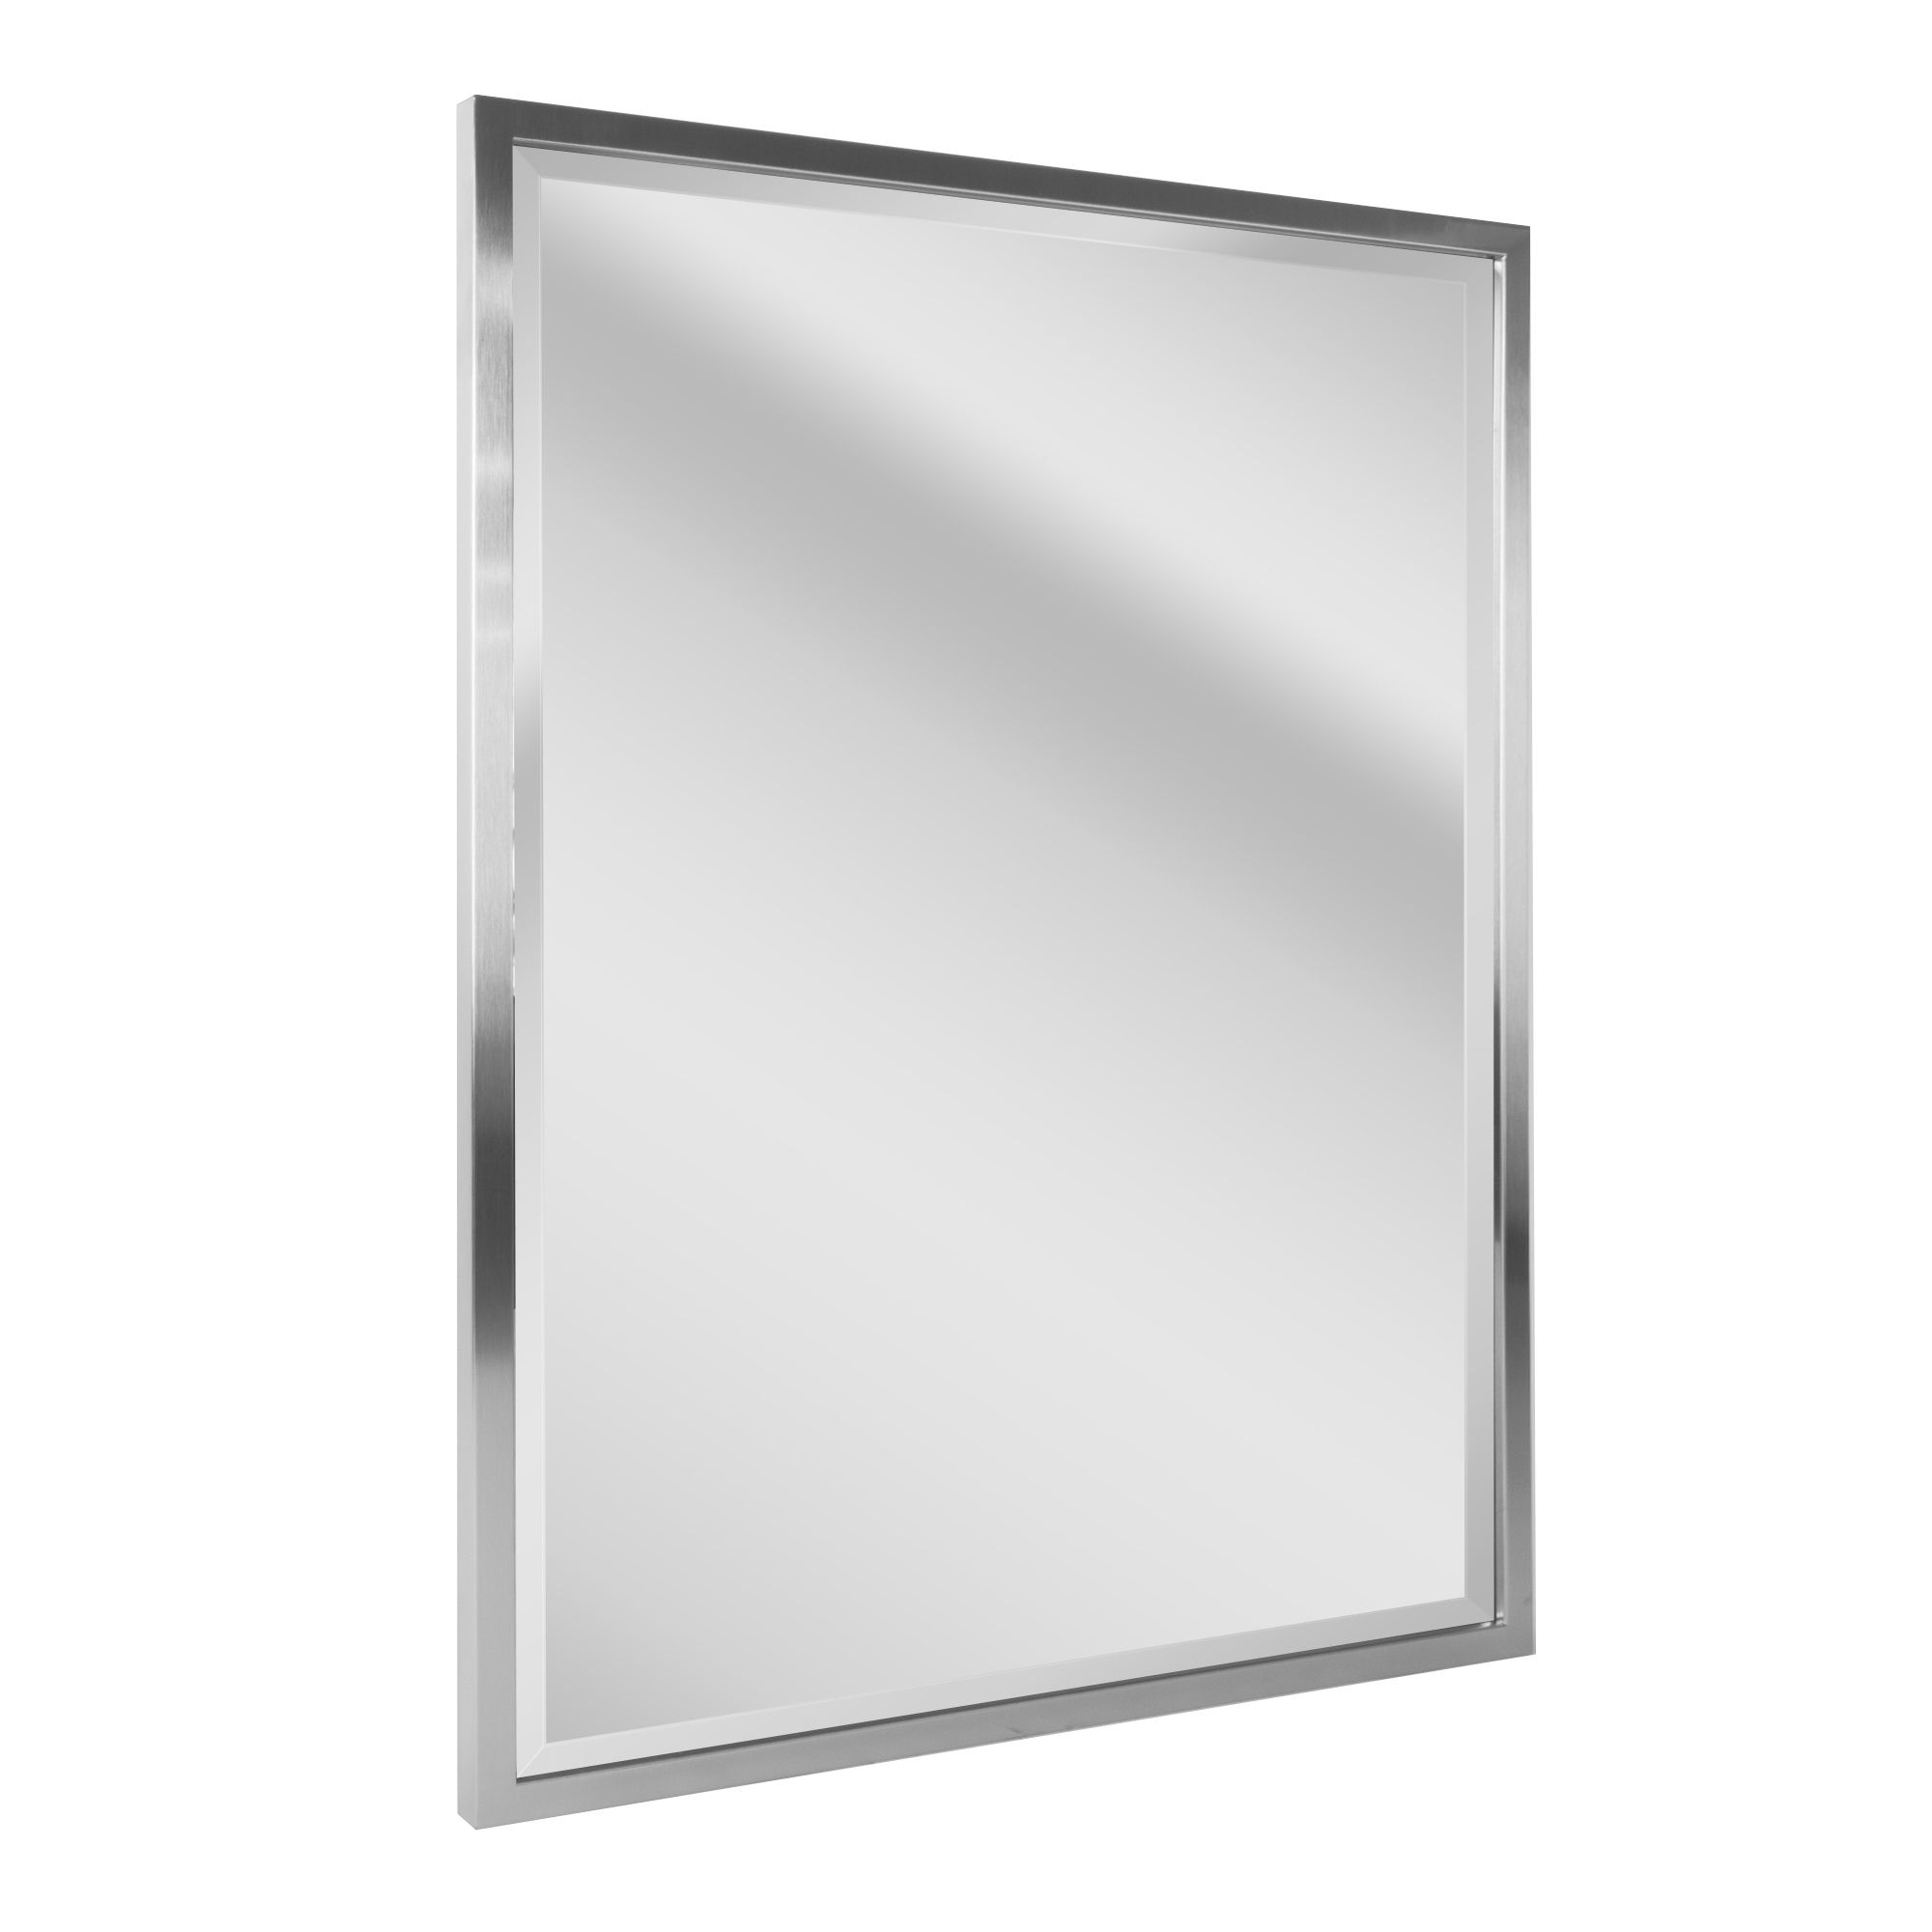 Head West Brushed Nickel Stainless Steel Rectangular Framed Beveled Within Square Frameless Beveled Vanity Wall Mirrors (View 13 of 15)